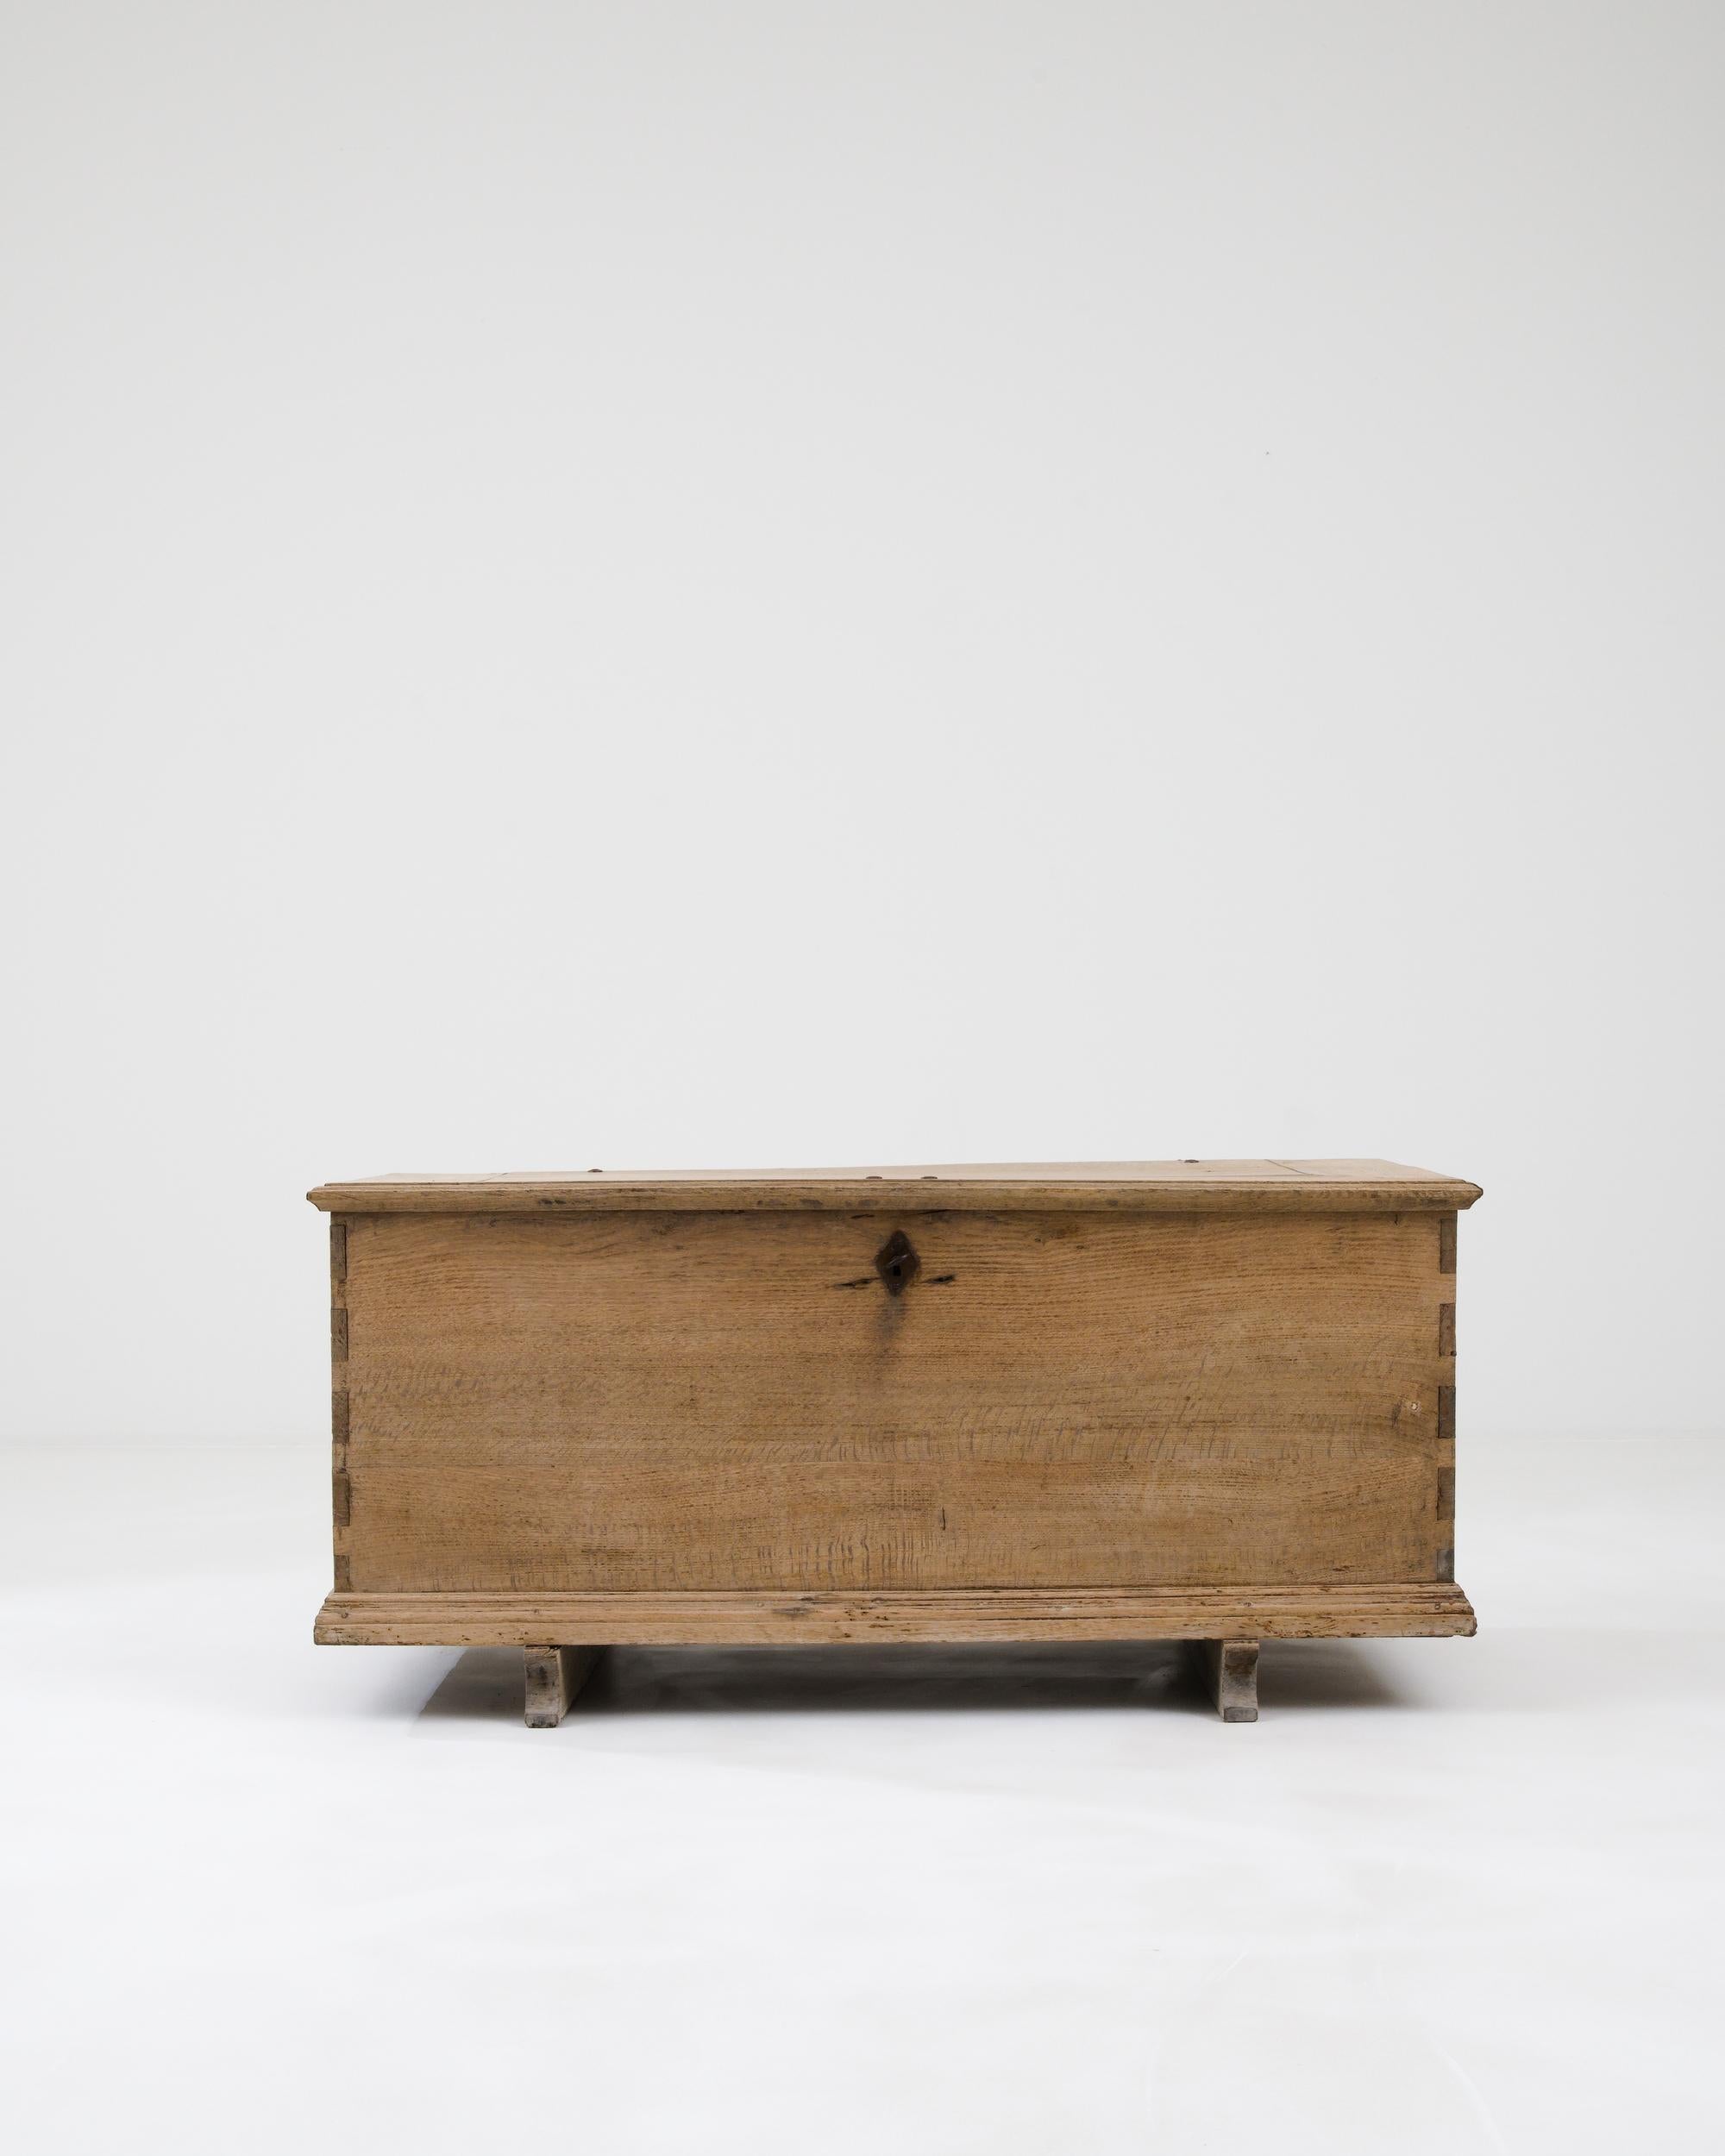 A wooden trunk created in 19th century France. A reminder of simple times, this wooden trunk shines with a bright and refreshing glow. The surface of the oak has been carefully restored through a bleaching process which both protects the material